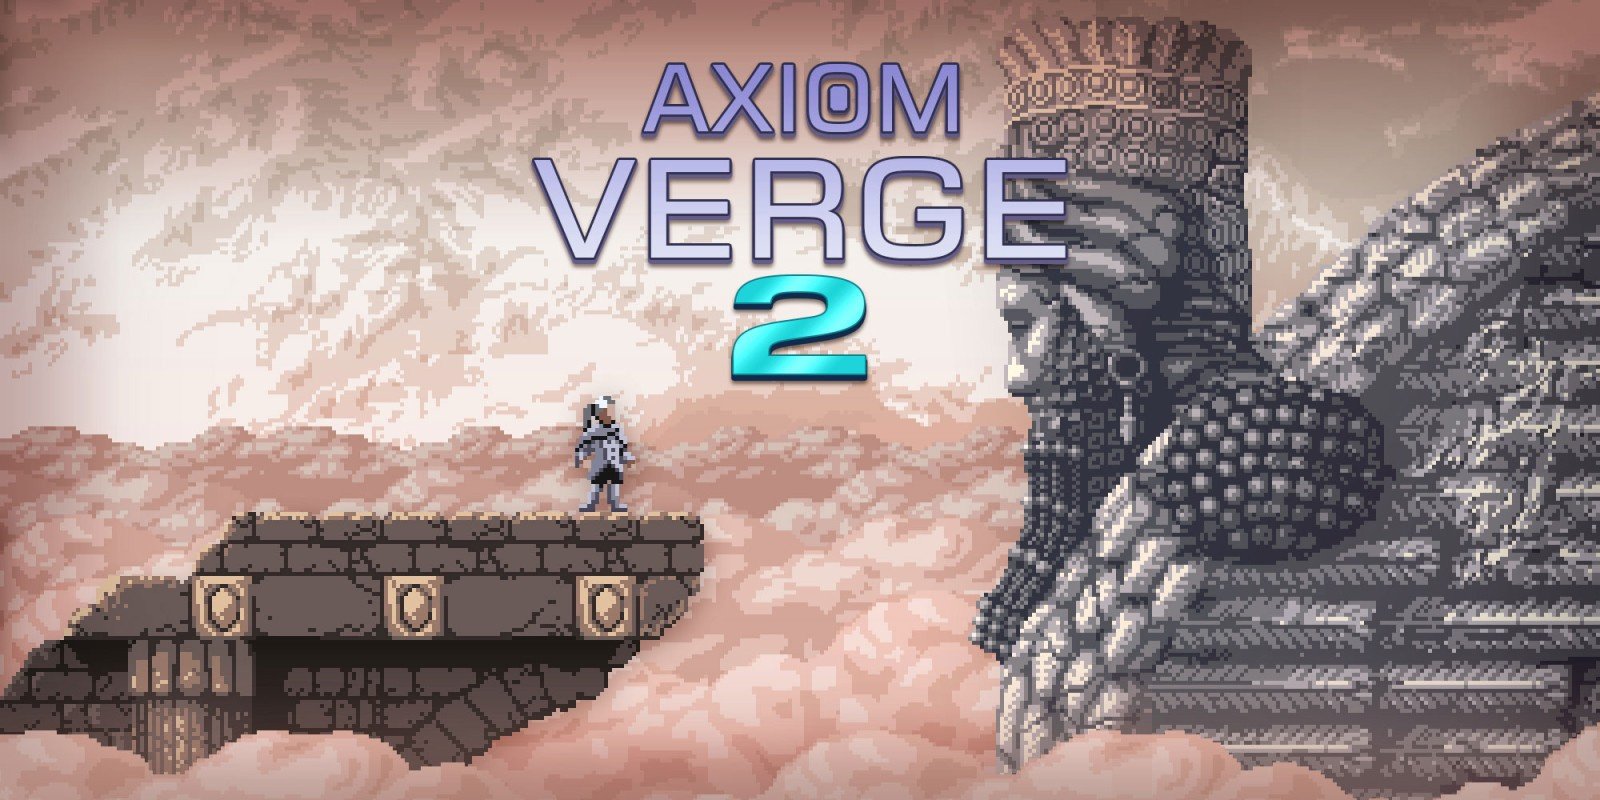 Axiom Verge 2 delayed until later this year